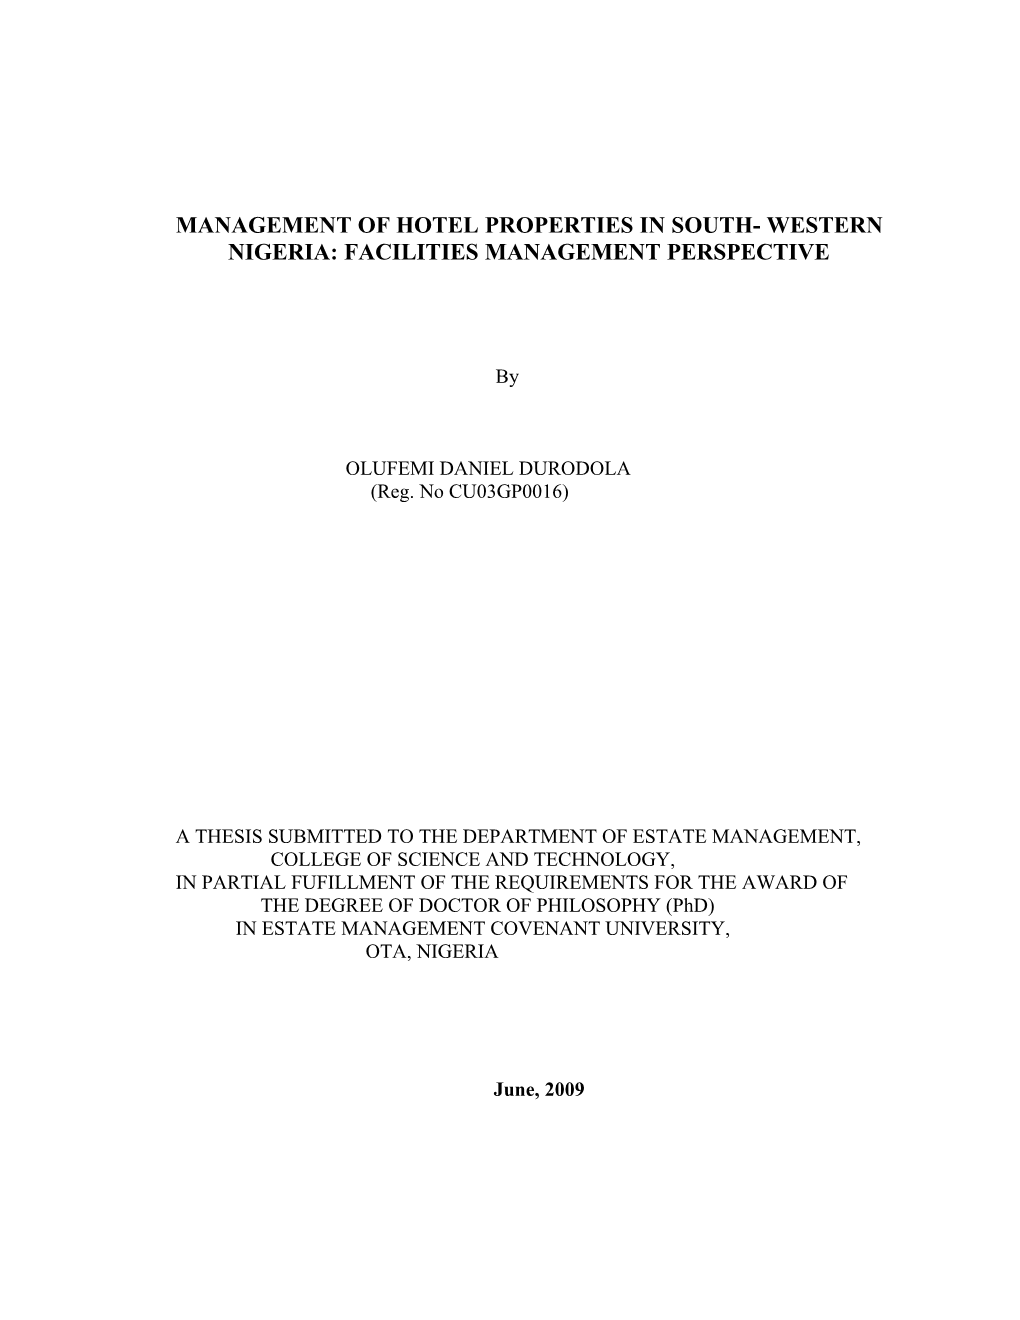 A Study of the Application and Benefits of Facilities Management in Medium Sized Nigerian Hotels